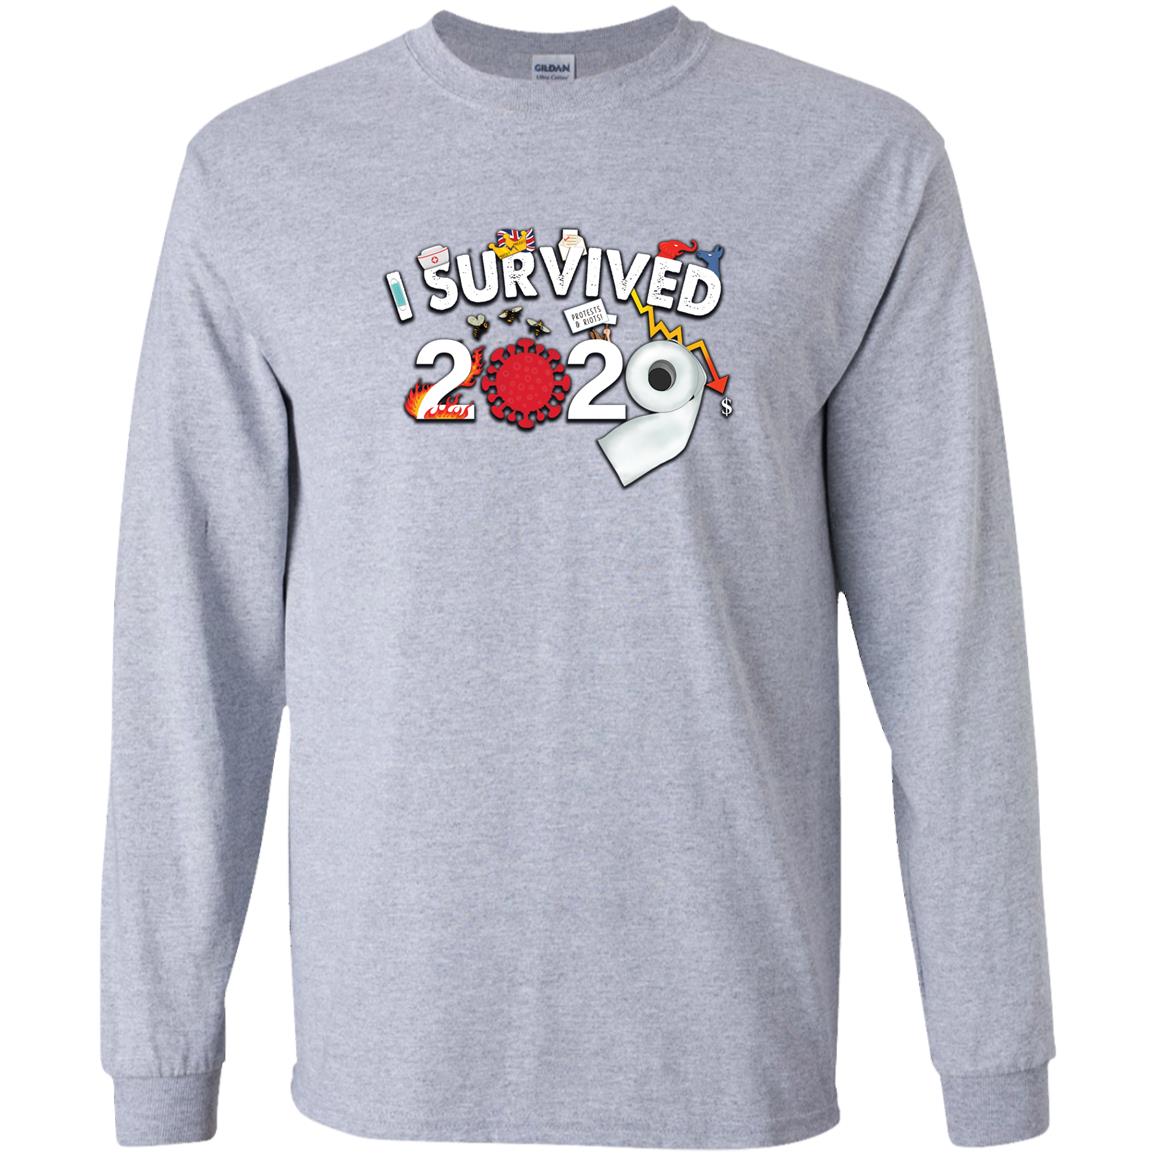 I Survived 2020 - Youth LS T-Shirt